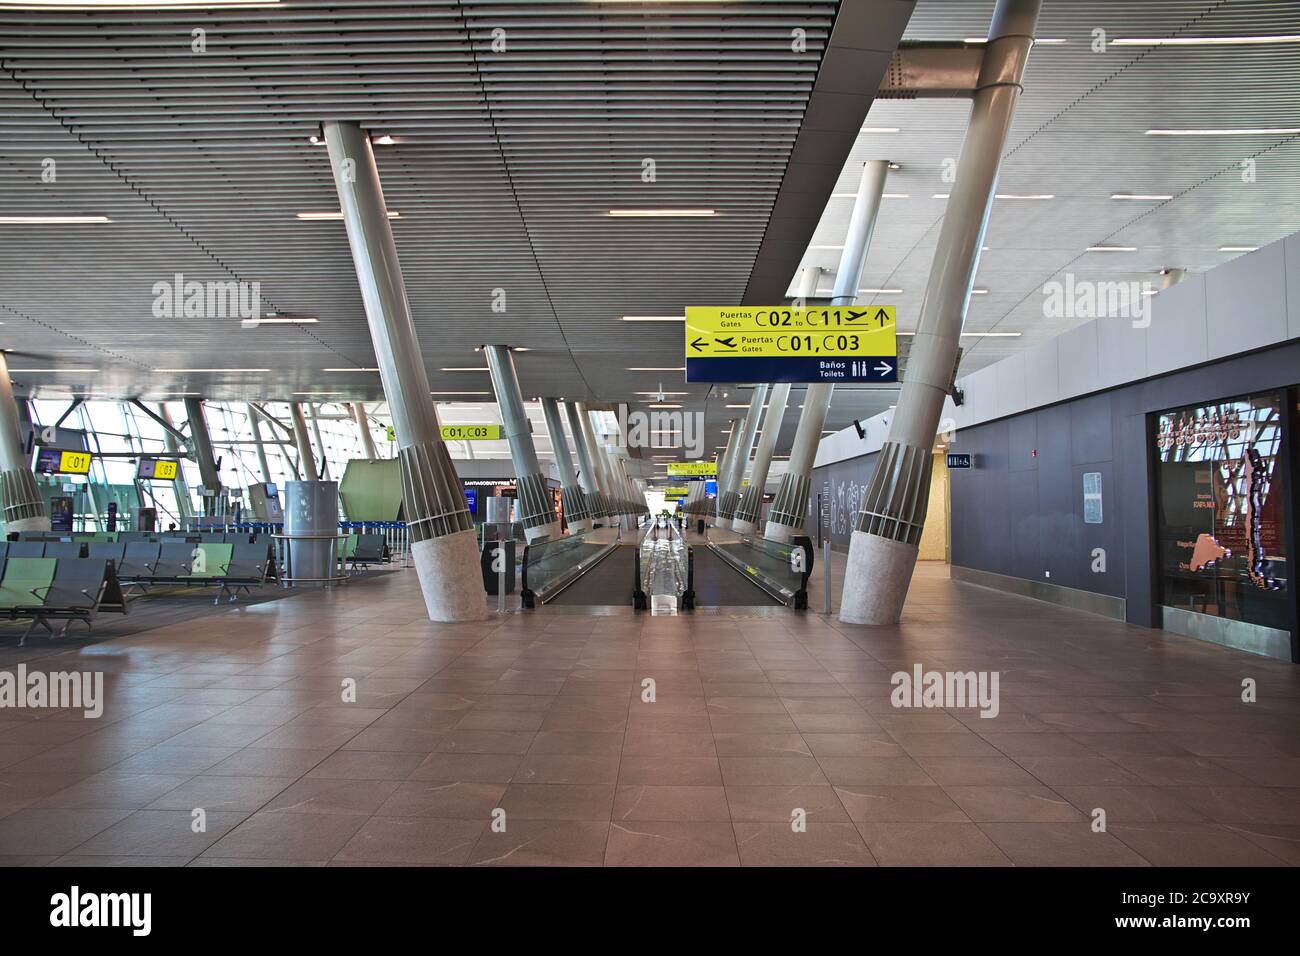 The airport in Santiago, Chile Stock Photo